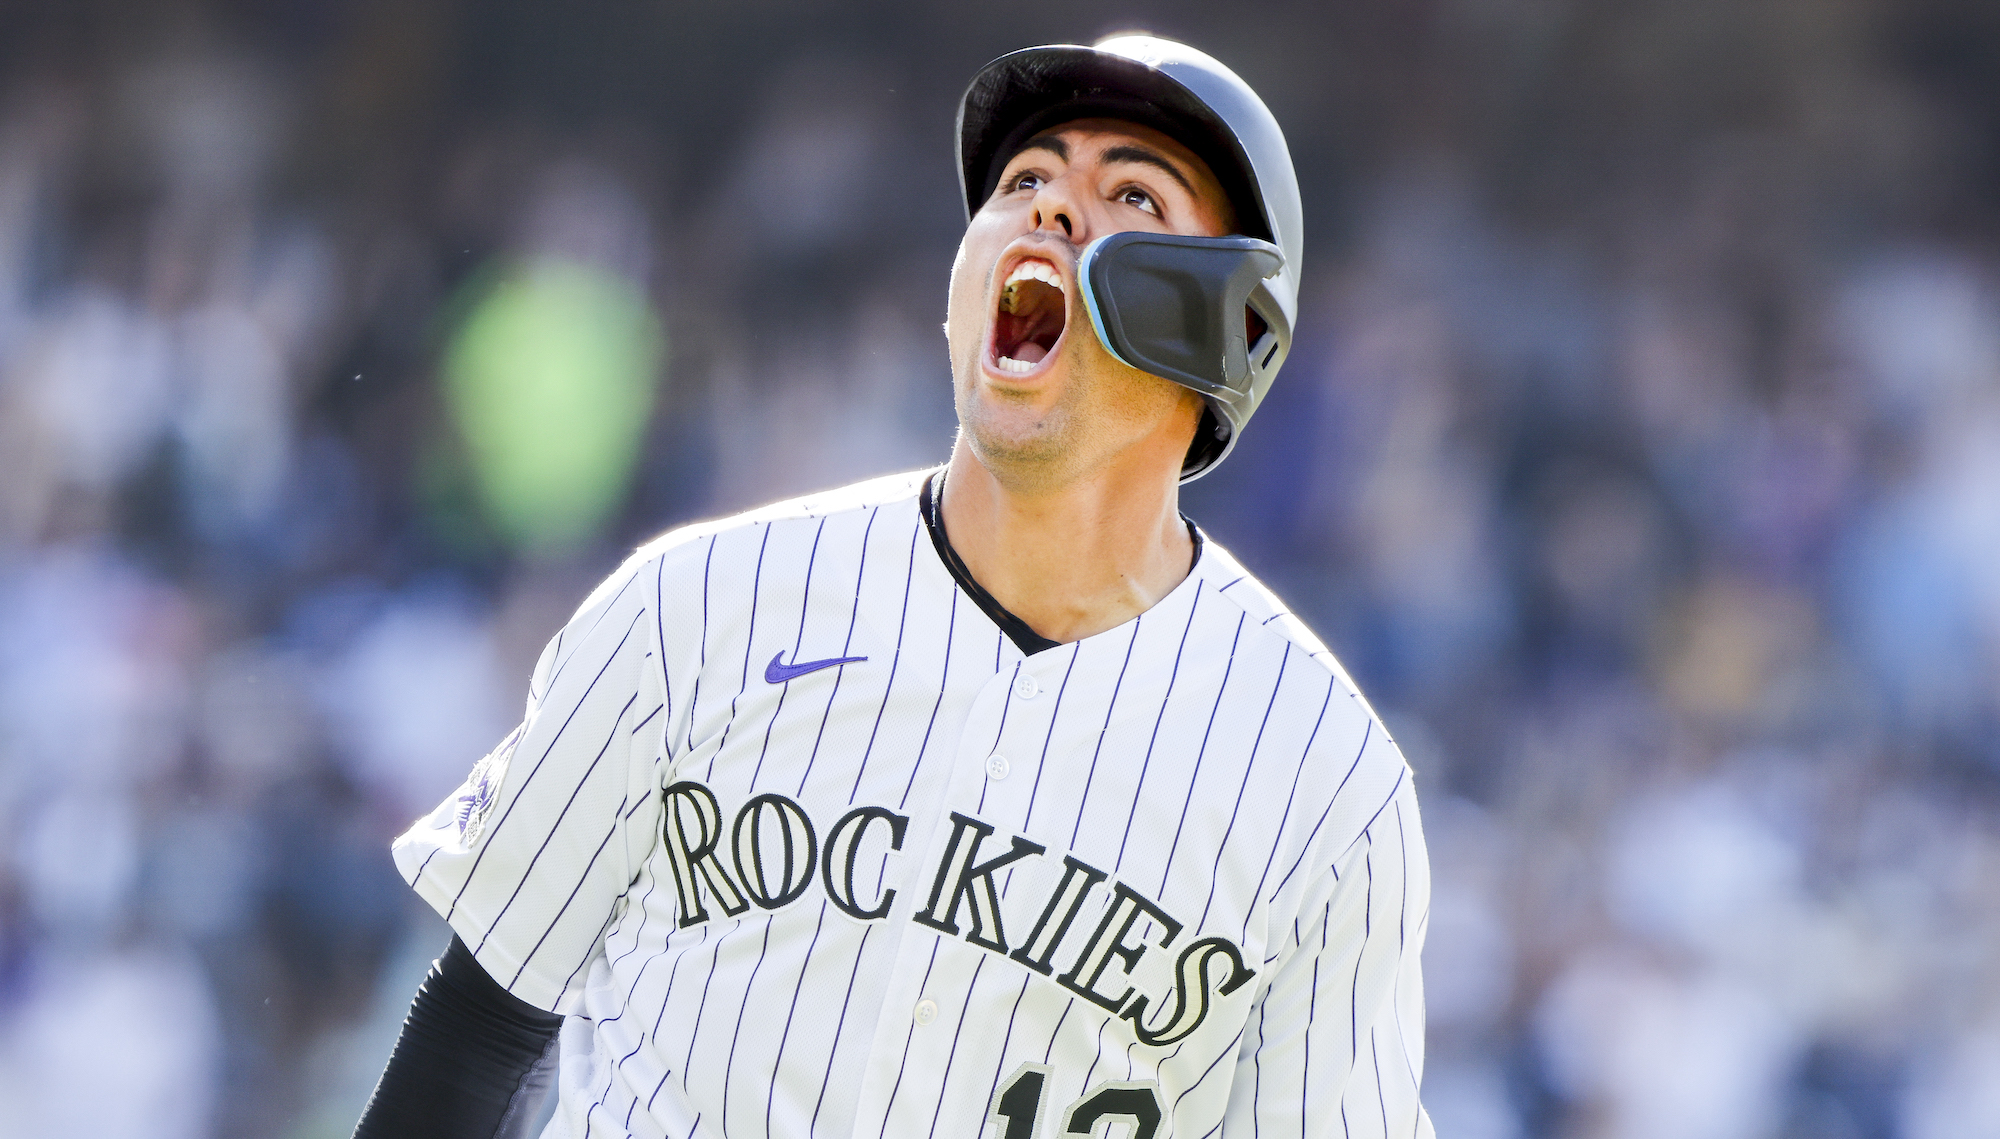 DENVER, CO - JULY 16: Alan Trejo #13 of the Colorado Rockies celebrates after hitting a walk-off home run to beat the New York Yankees in the eleventh inning at Coors Field on July 16, 2023 in Denver, Colorado. (Photo by Michael Ciaglo/Getty Images) *** Local Caption *** Alan Trejo